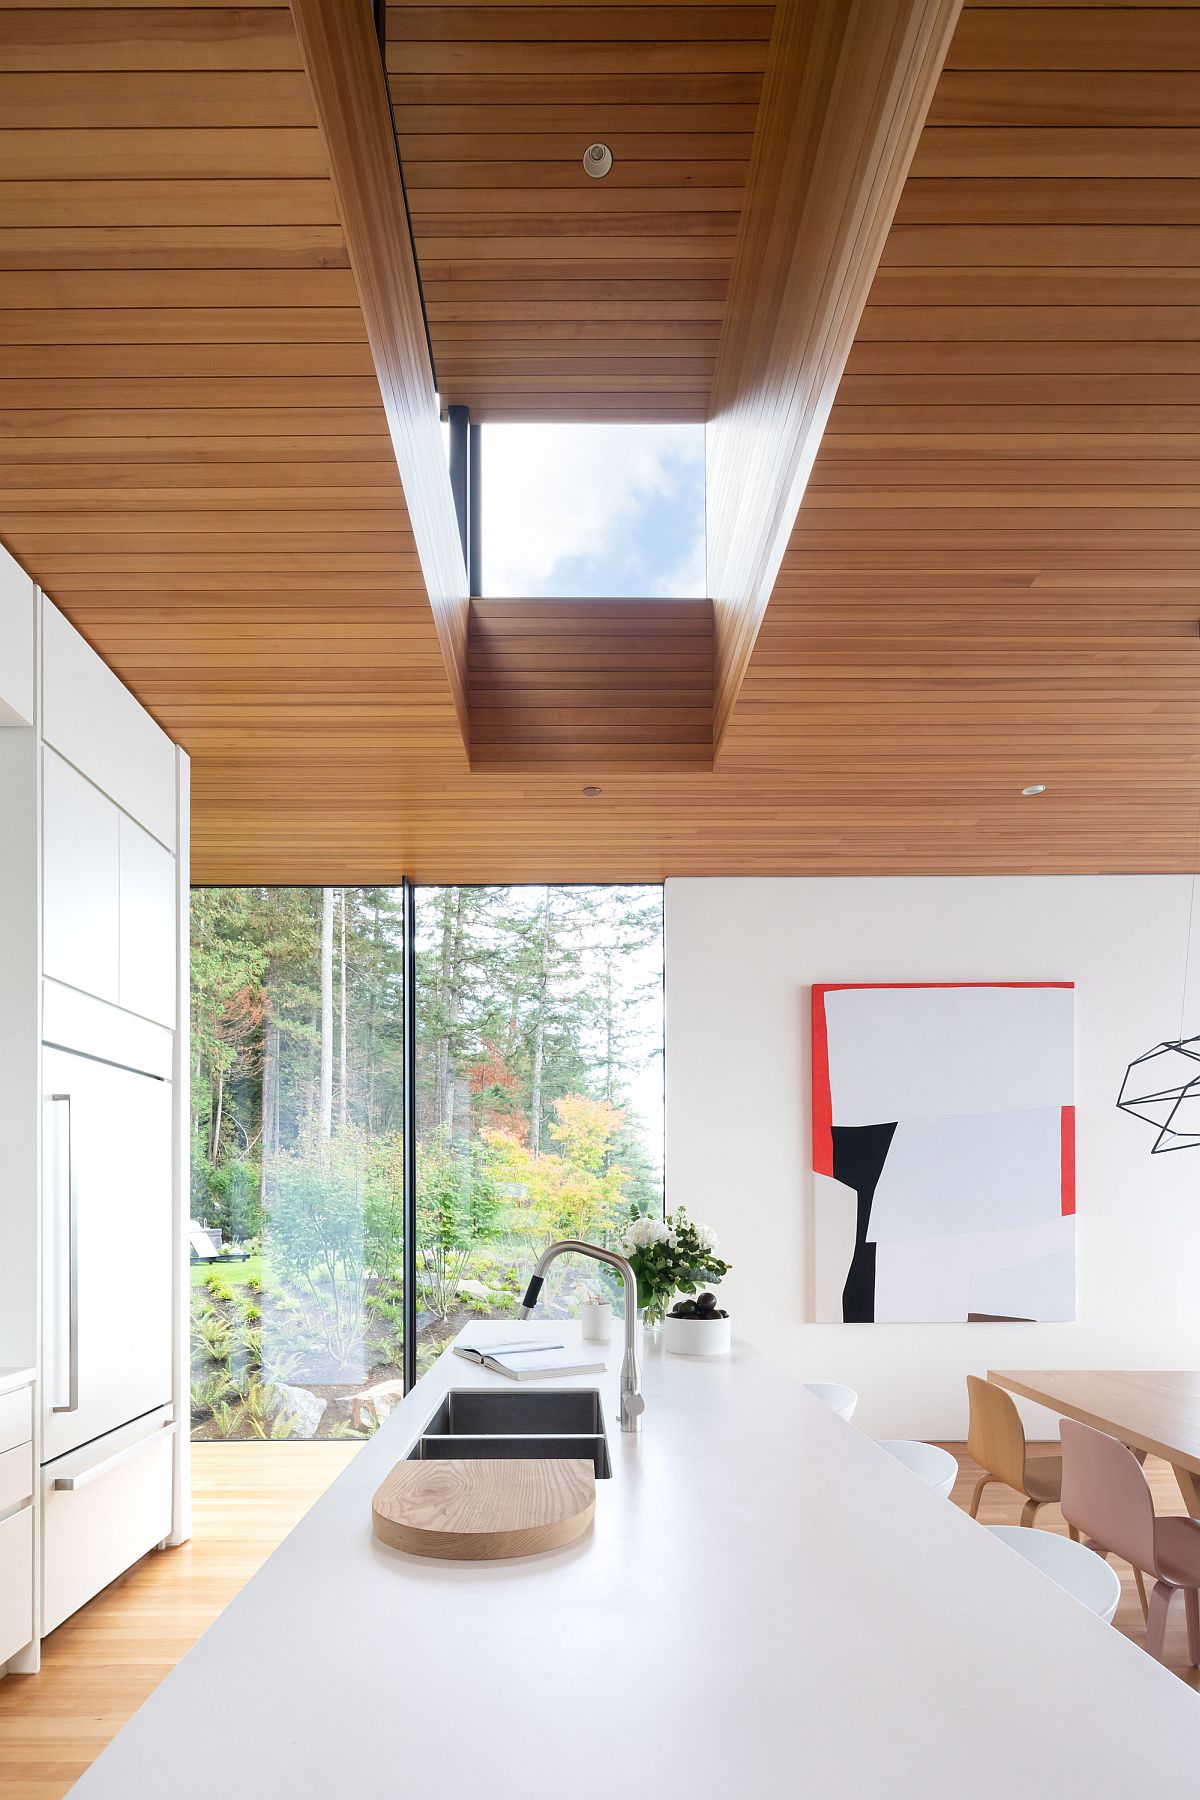 Skylight-brings-additional-natural-light-into-the-kitchen-of-the-island-home-54919